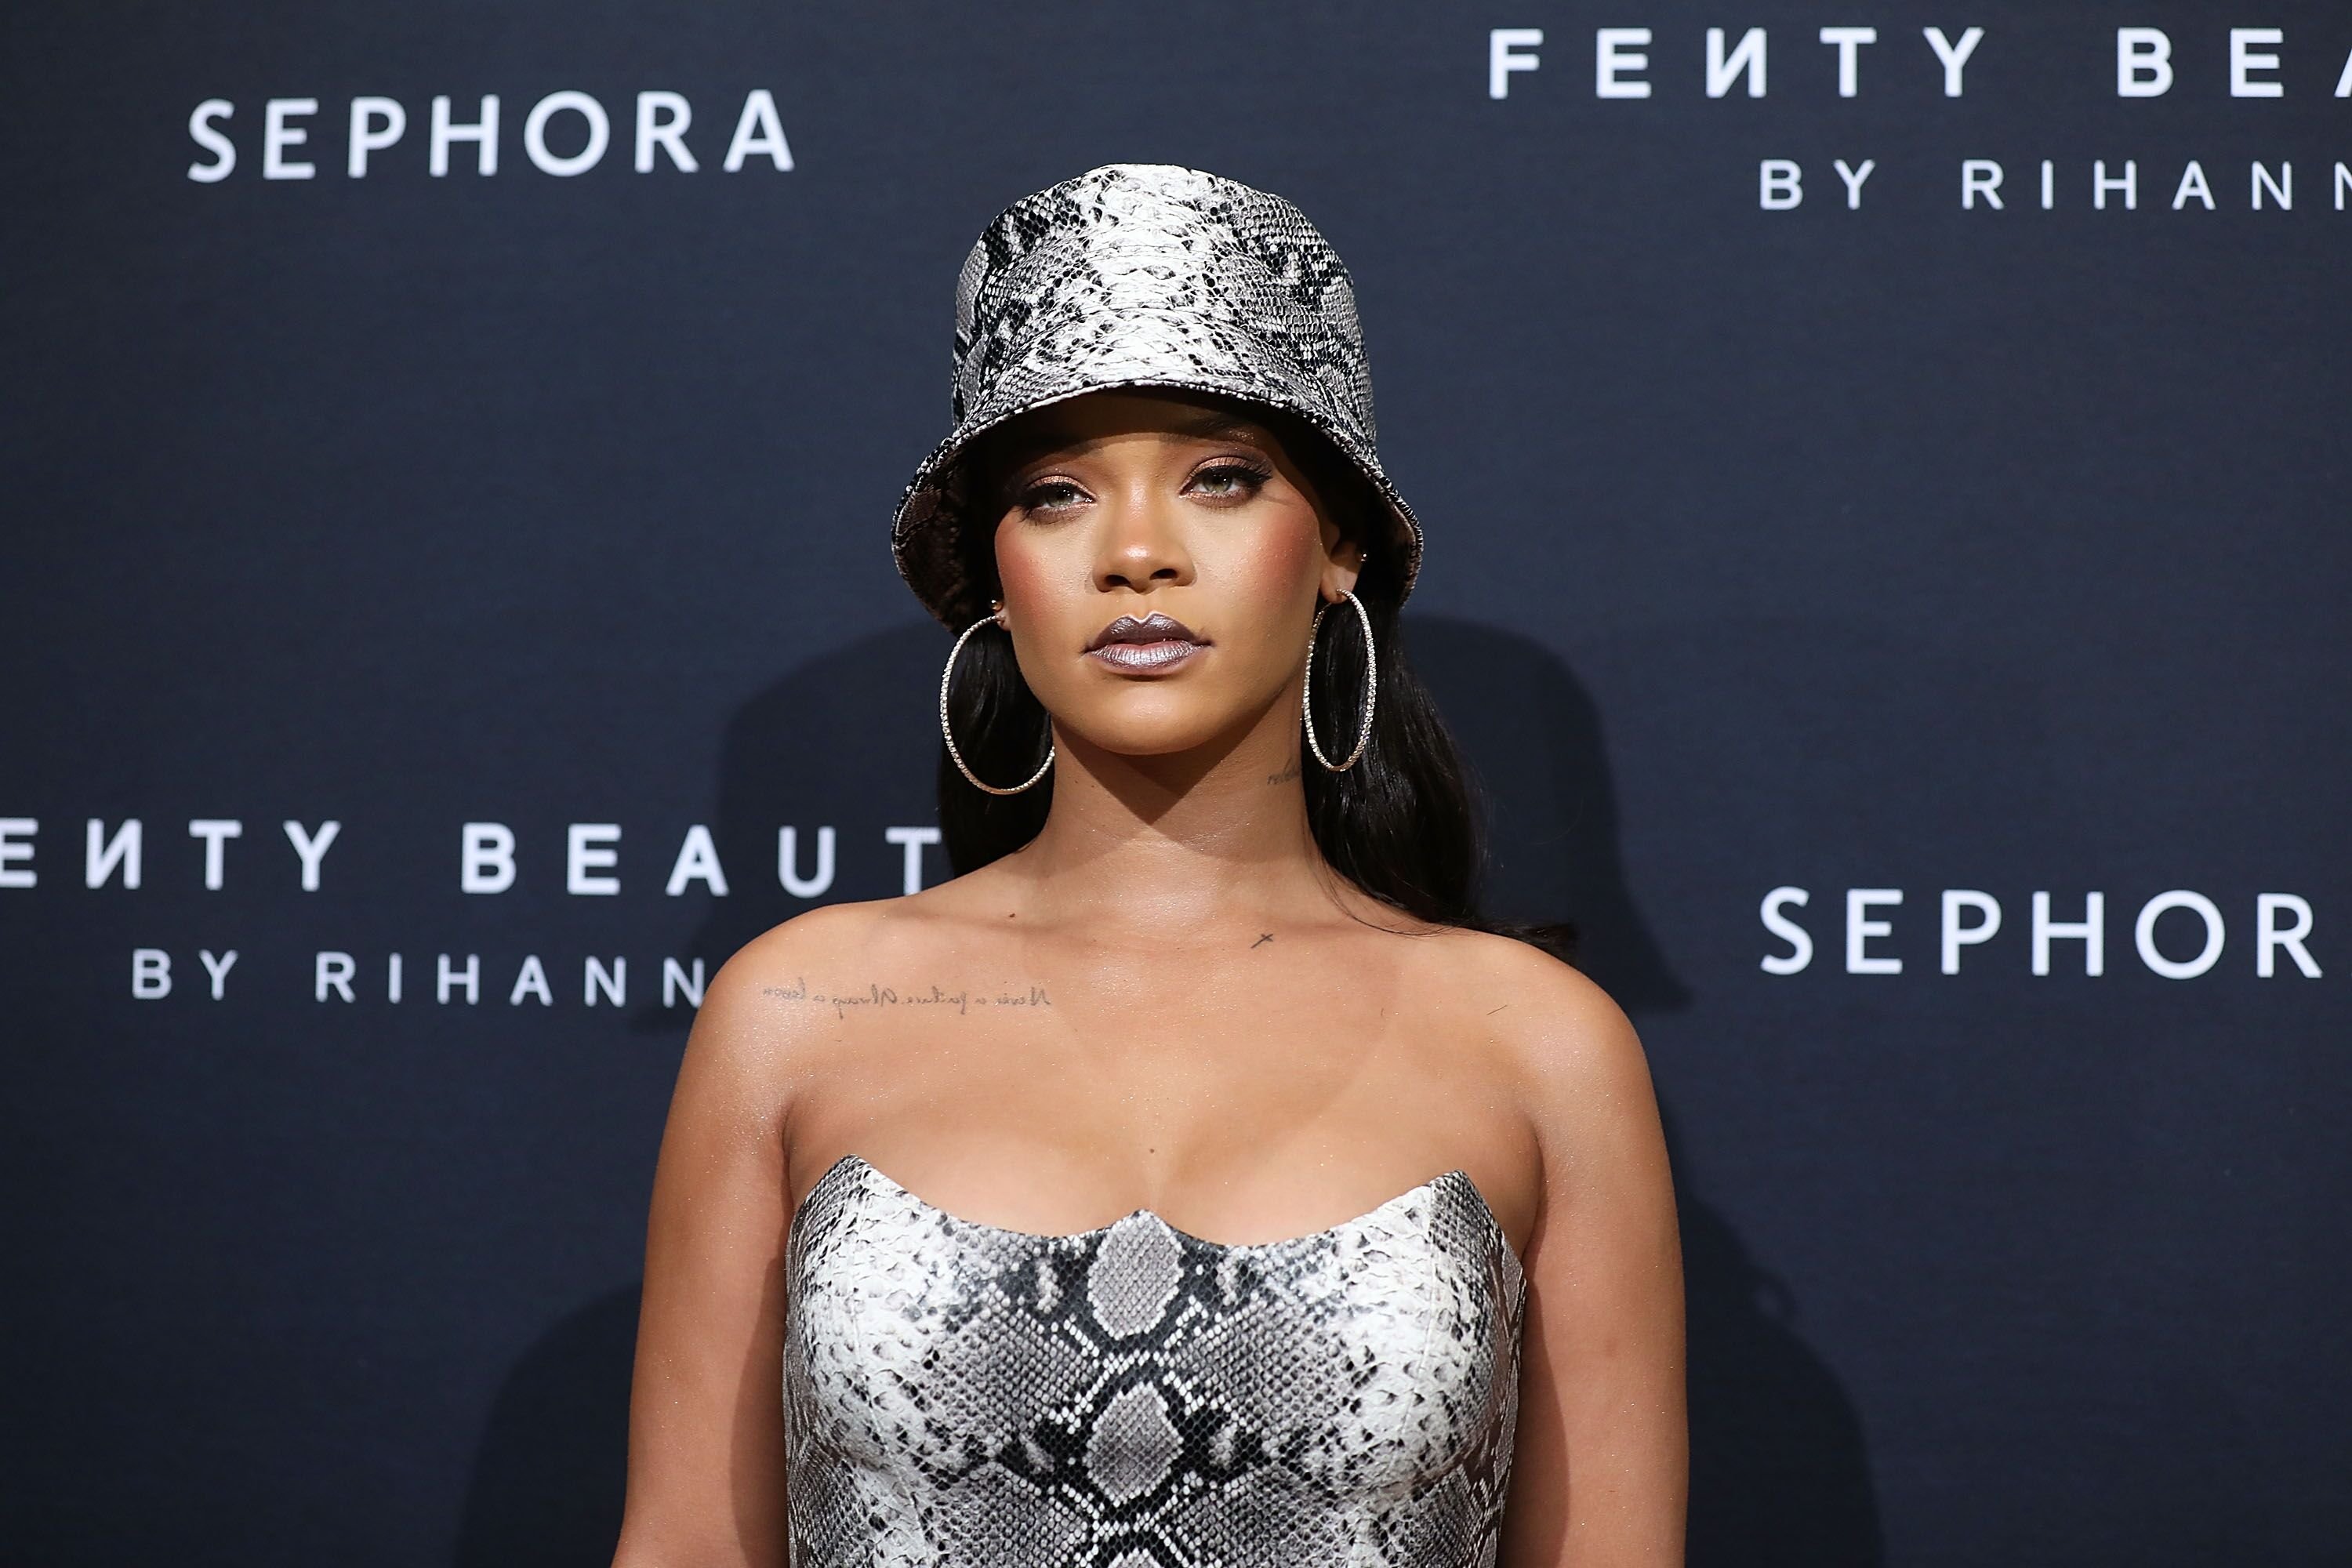 Rihanna at the Fenty Beauty by Rihanna Anniversary Event in Sydney, Australia on October 3, 2018. | Photo: Getty Images